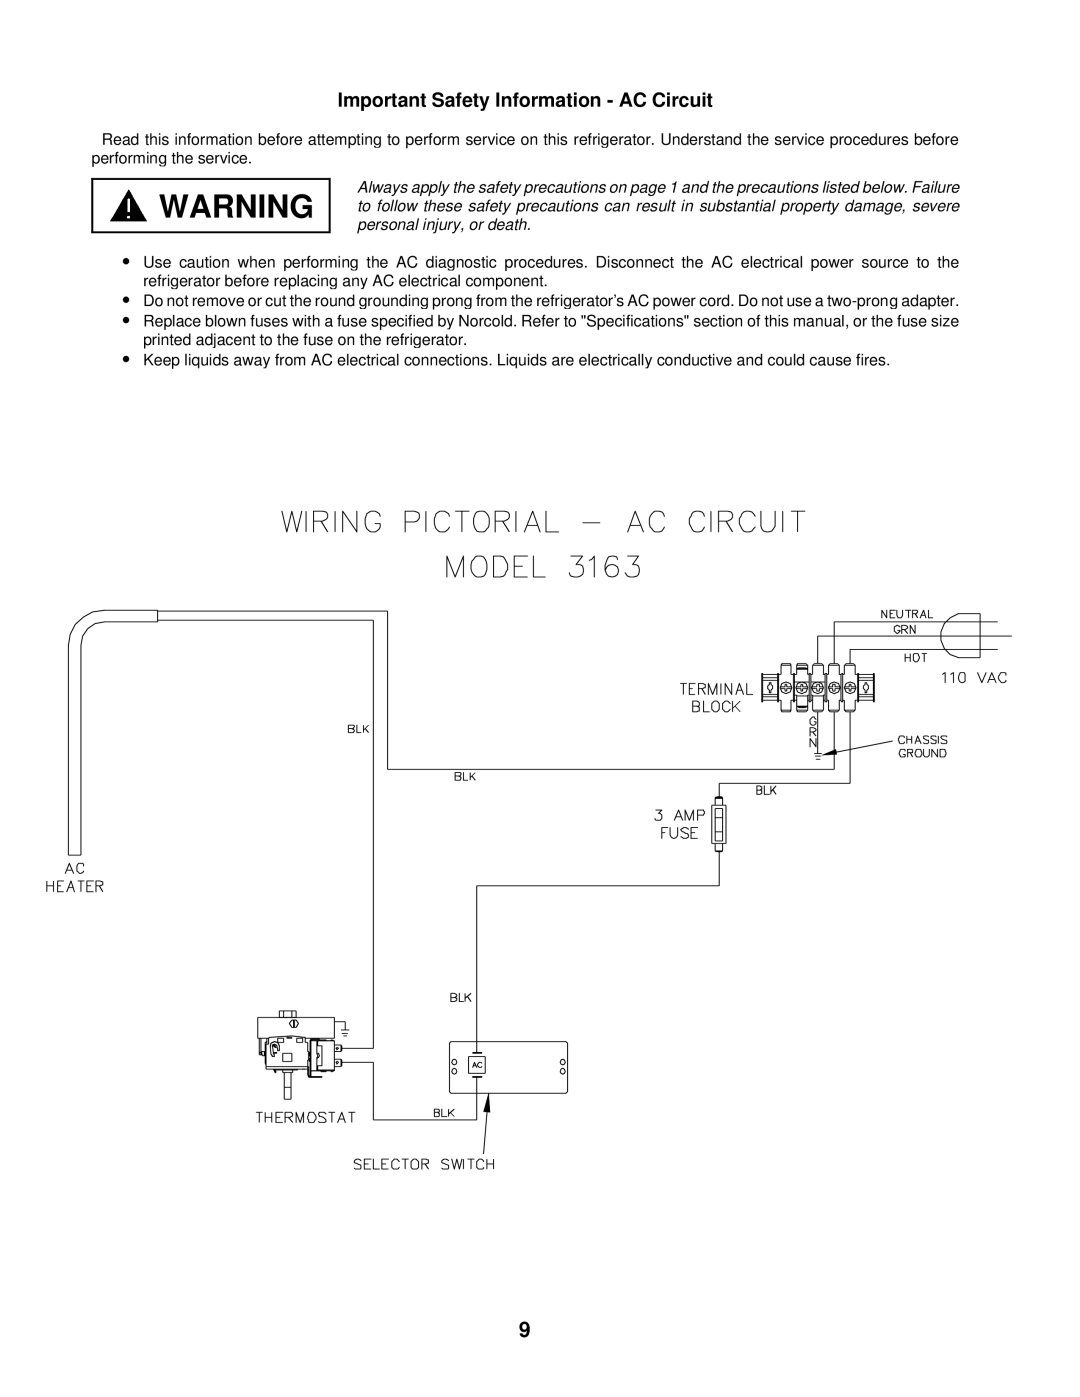 Bryant 3163 service manual Important Safety Information - AC Circuit 